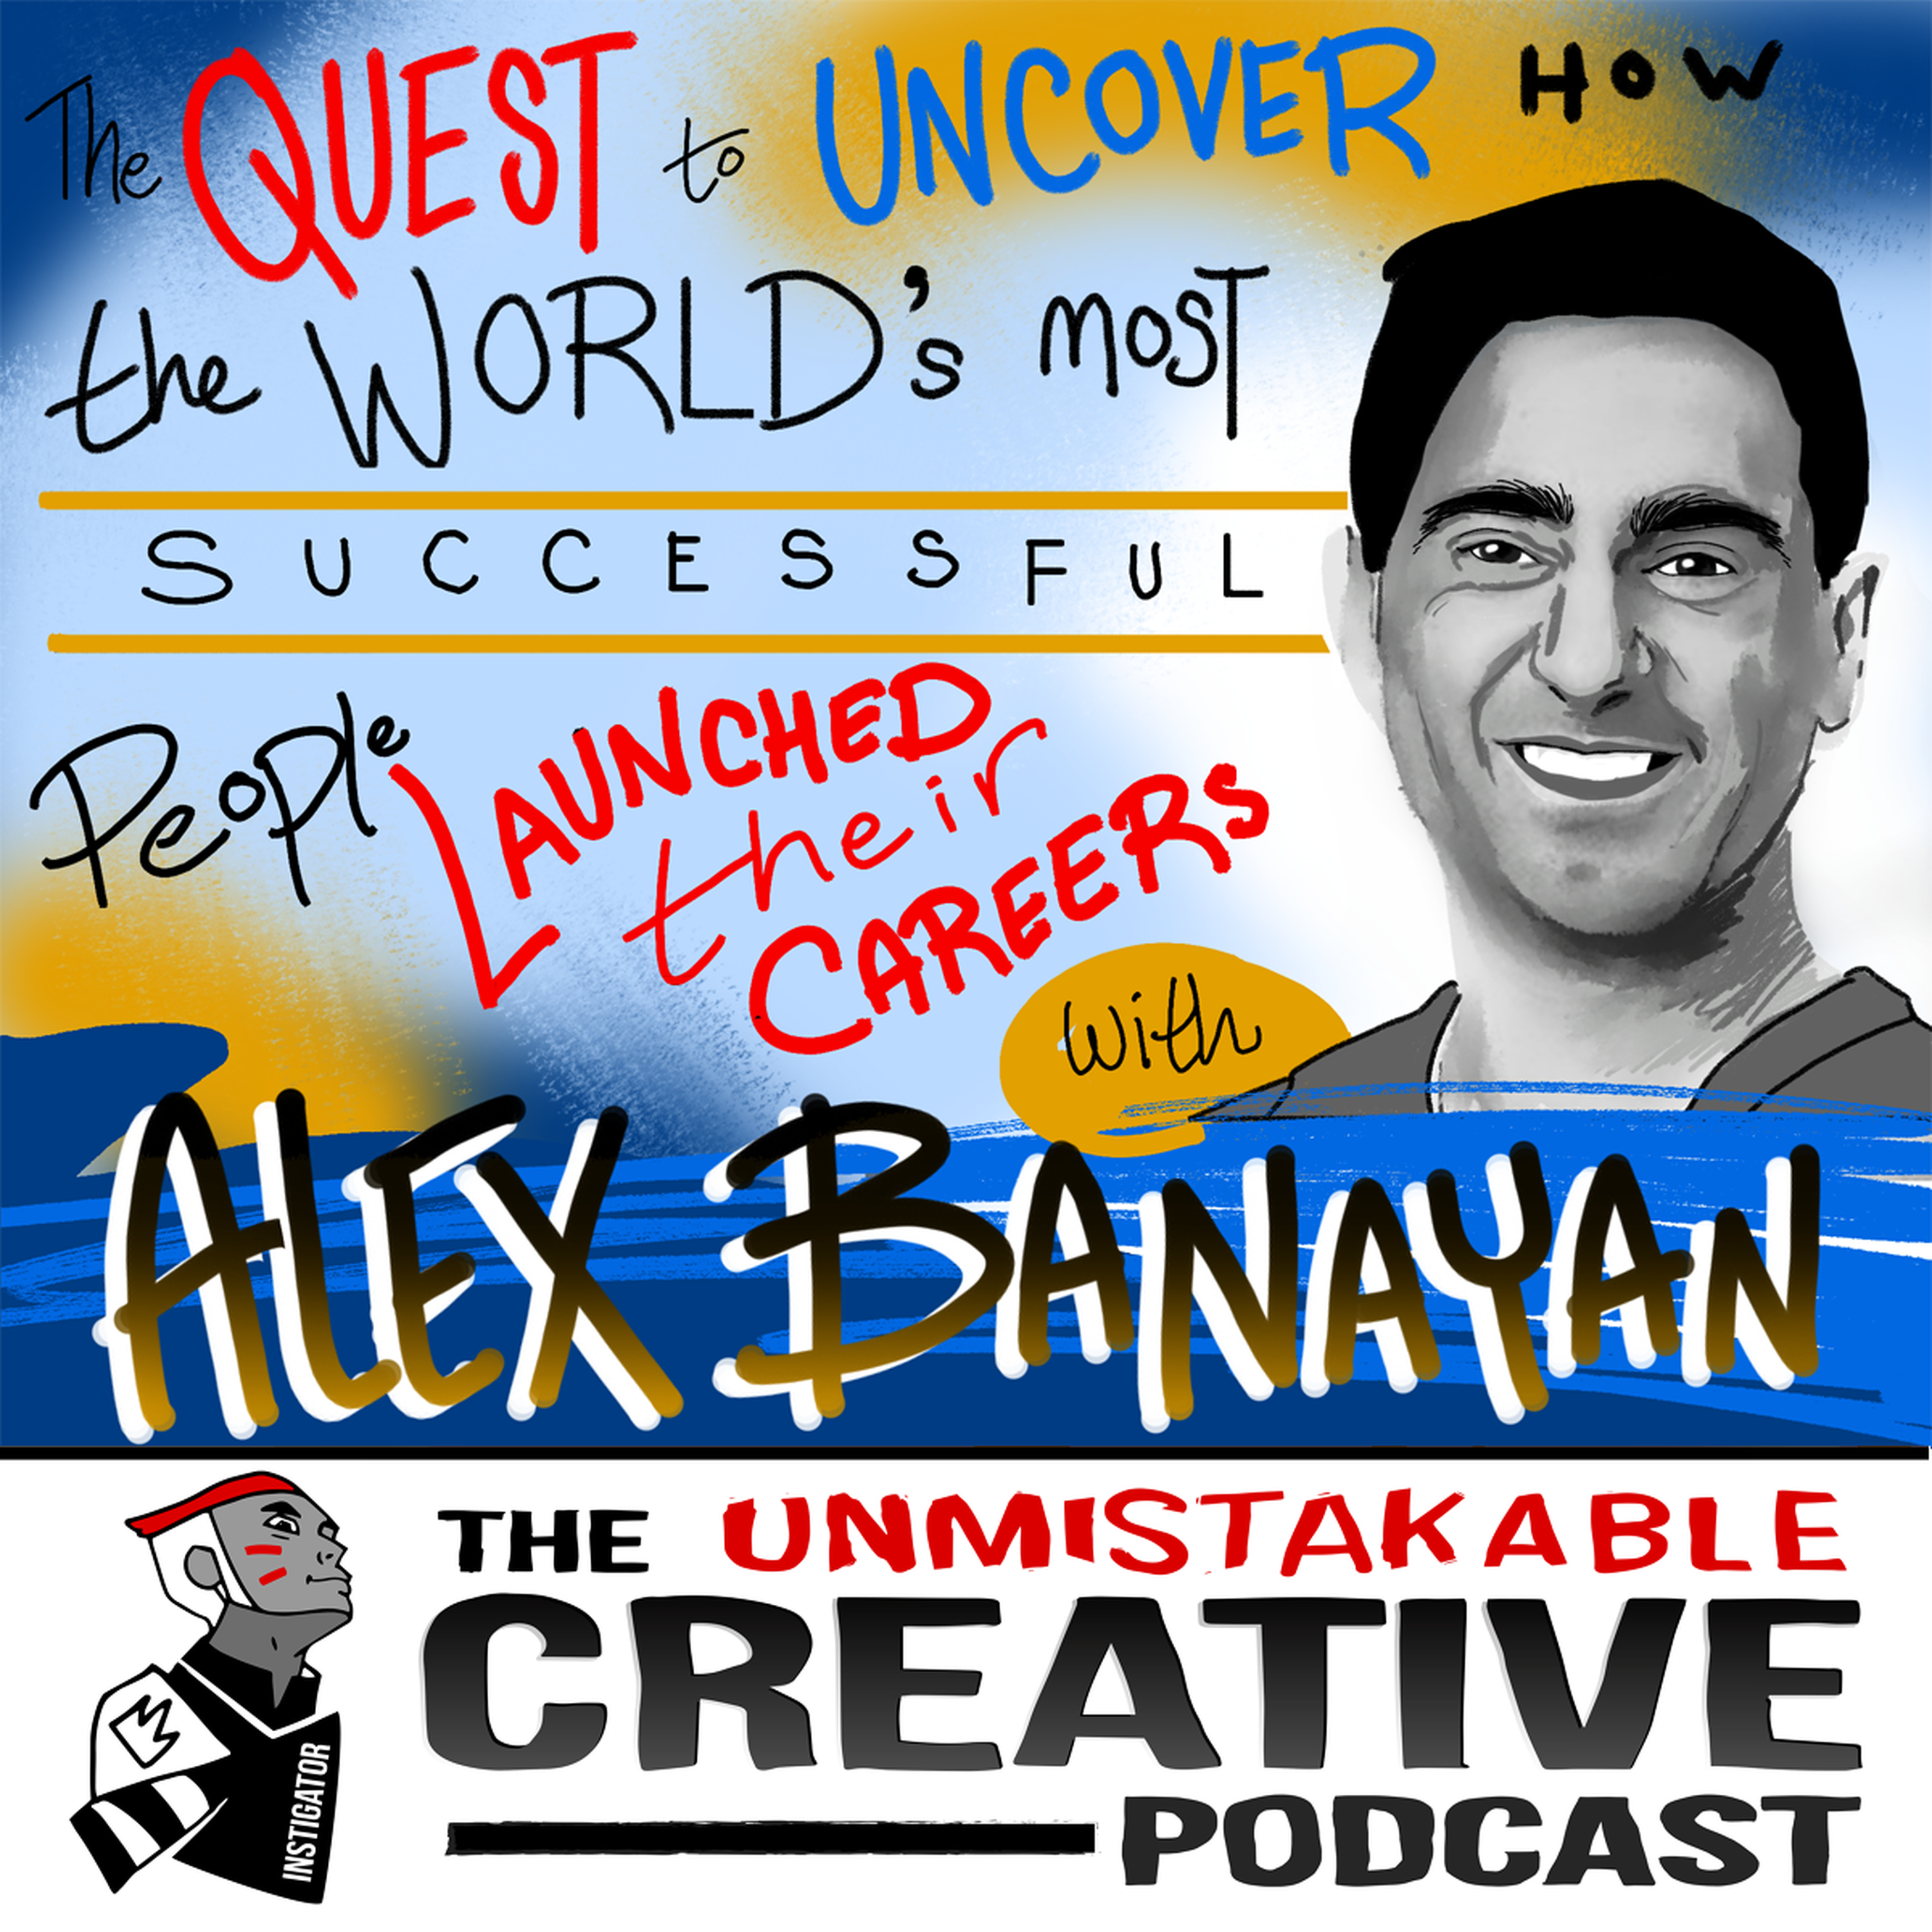 Alex Banayan: The Quest to Uncover How the World’s Most Successful People Launched Their Careers Image